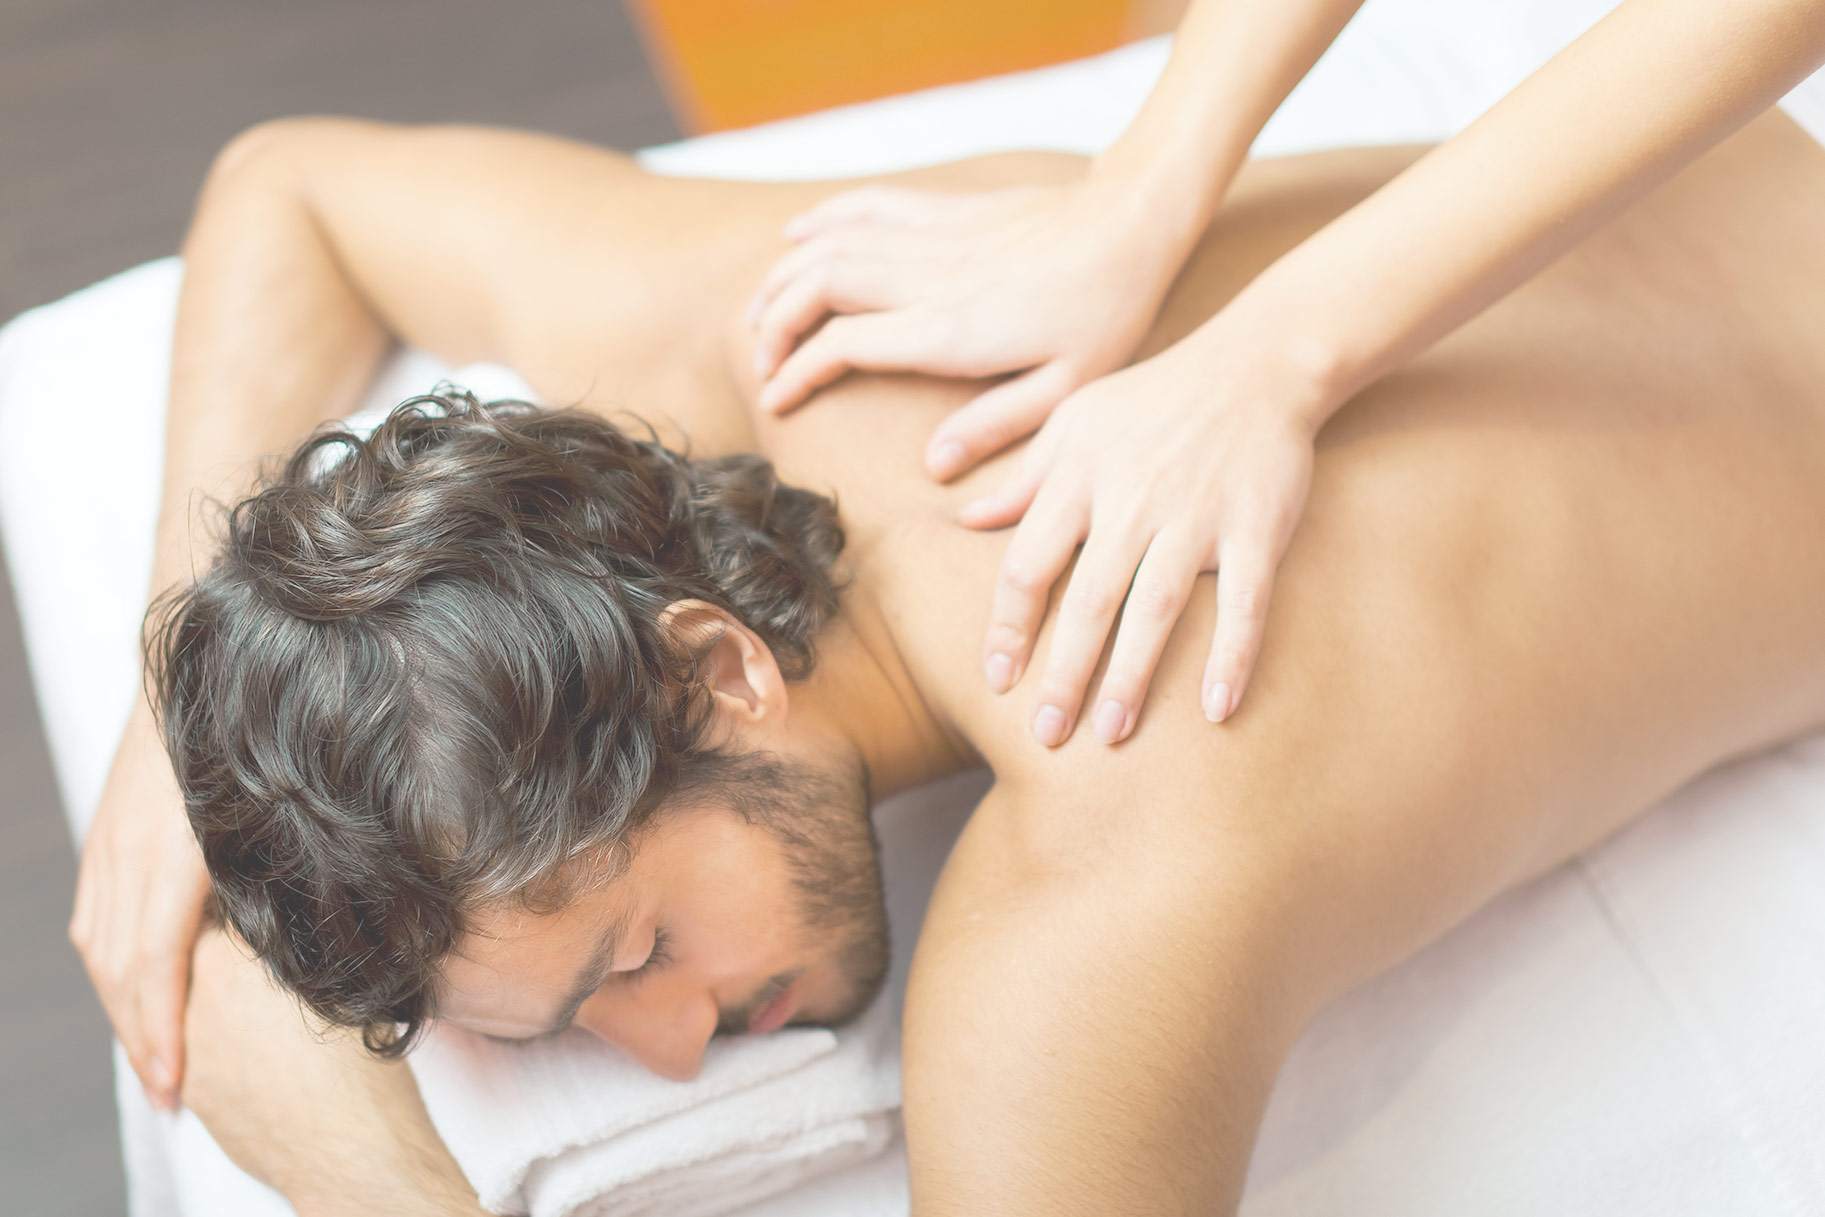 Best of Massage with happy ending